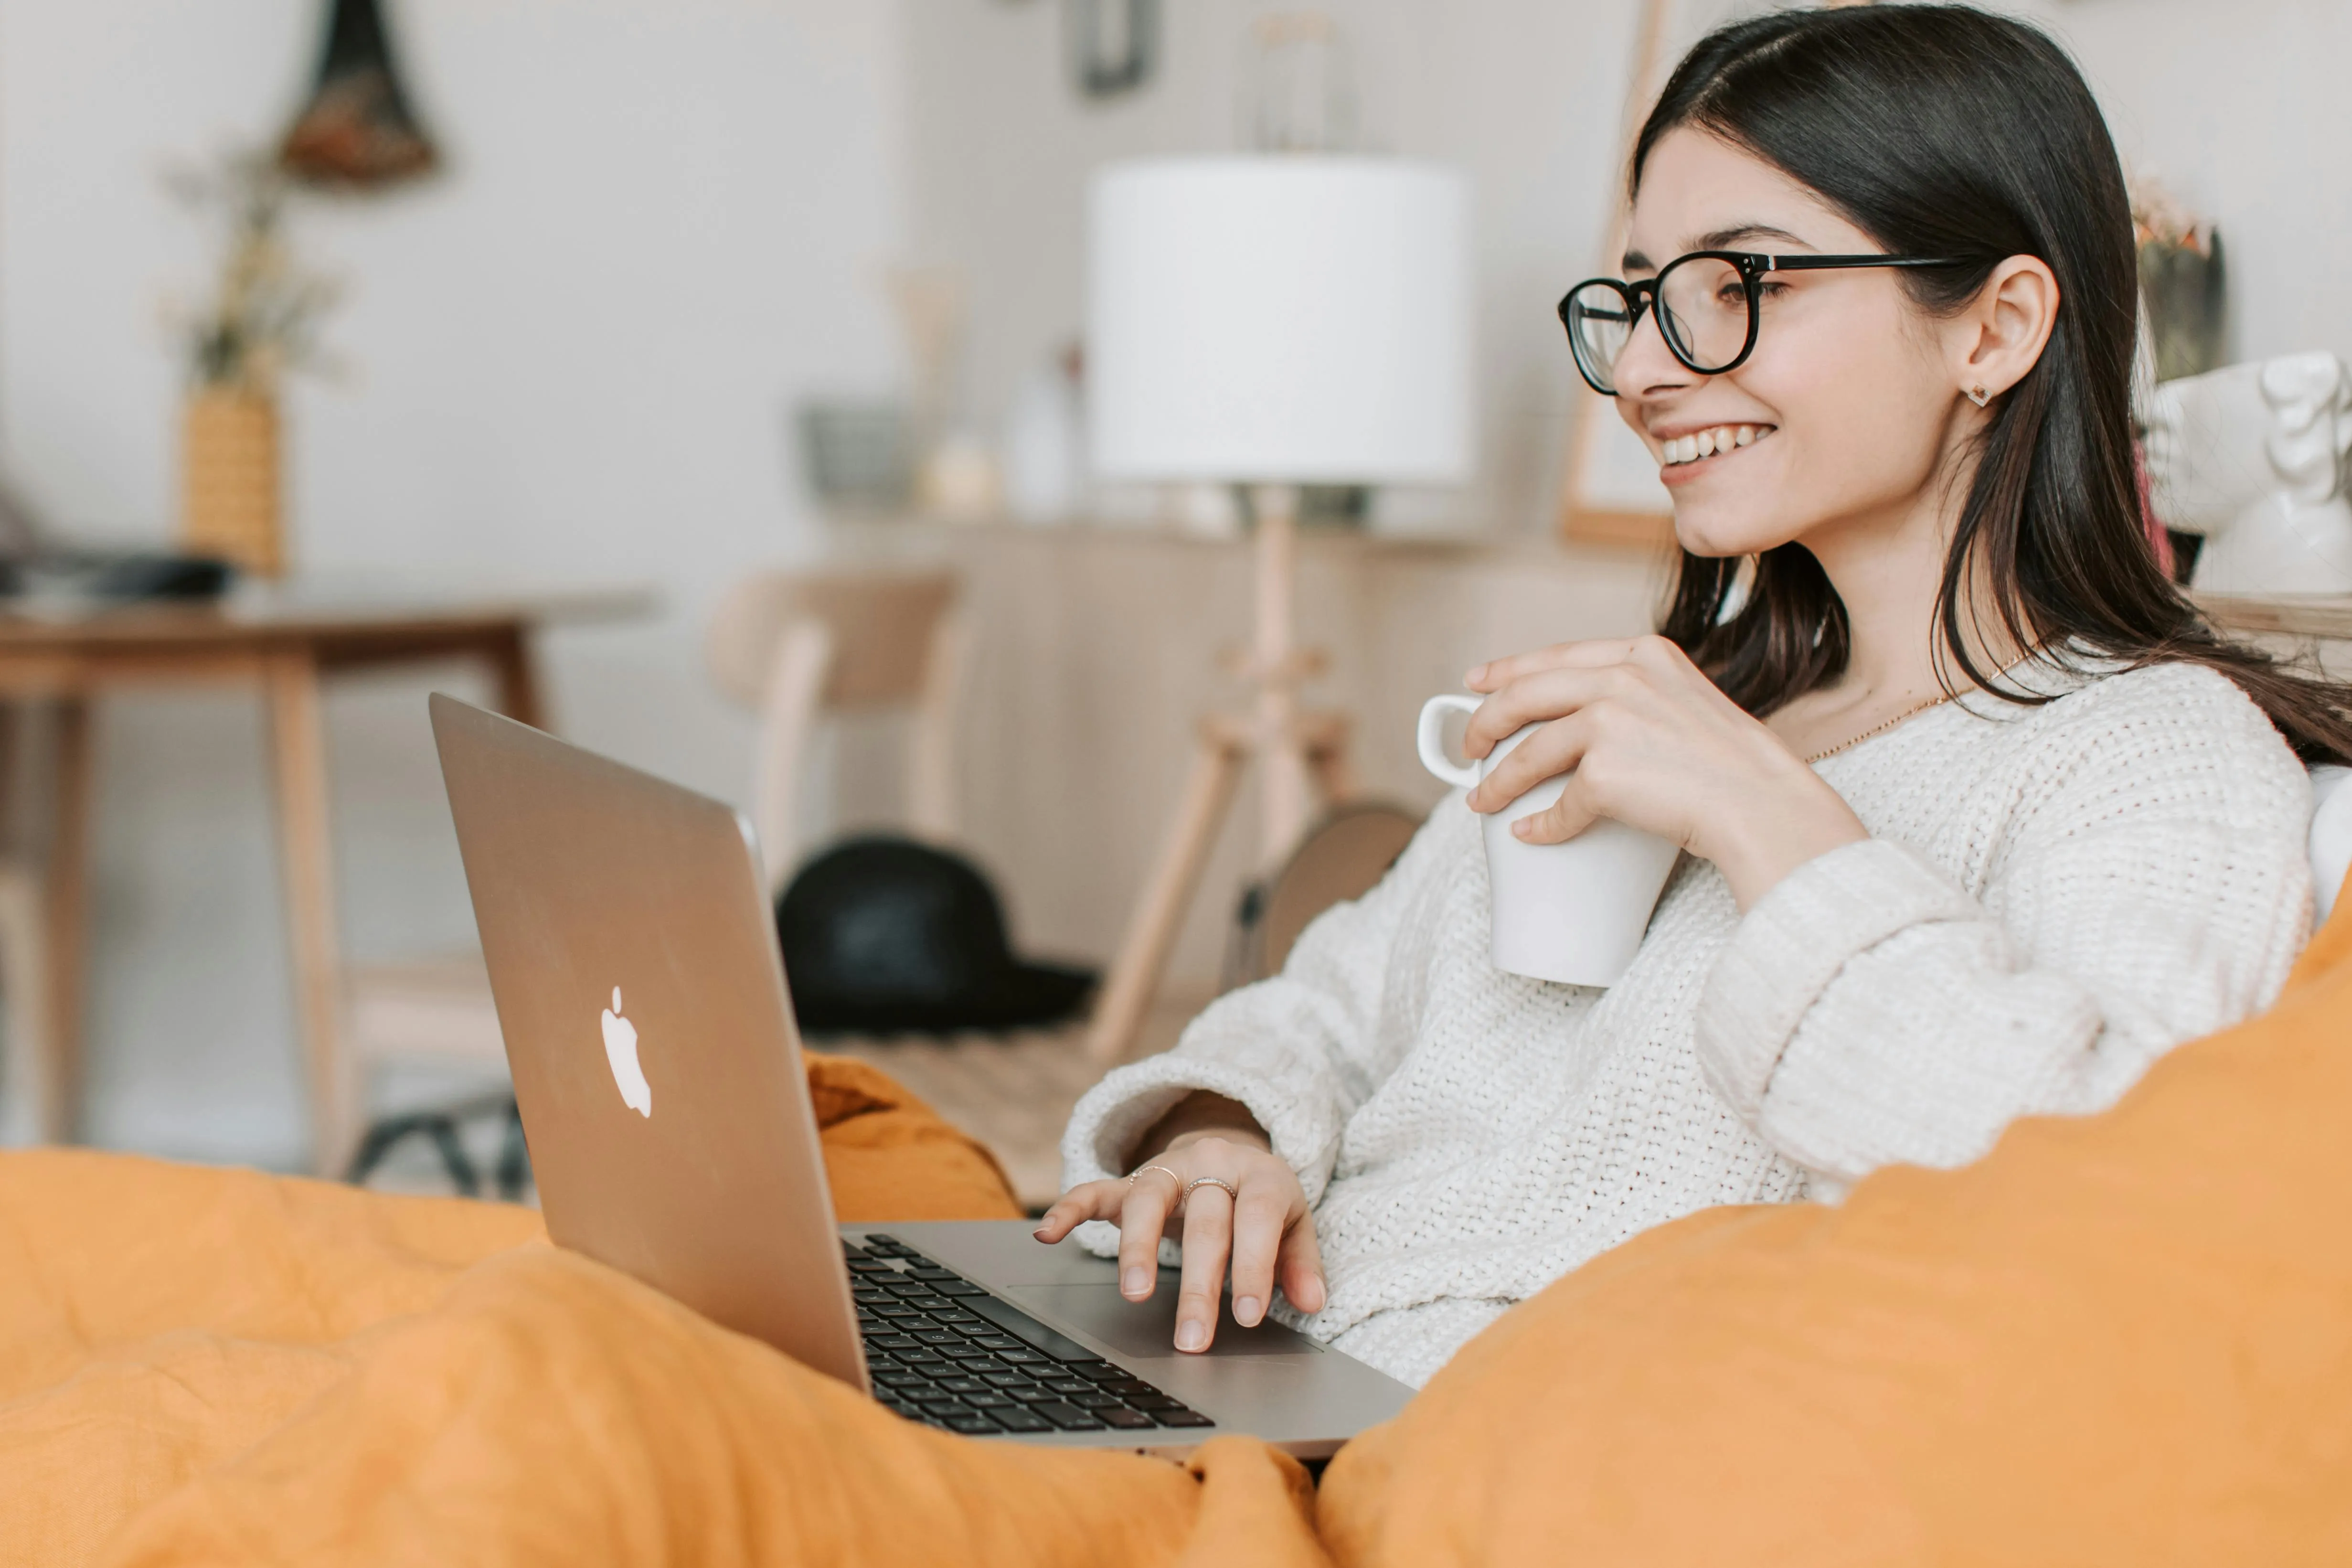 A woman sitting on a couch working on a laptop while holding a coffee cup